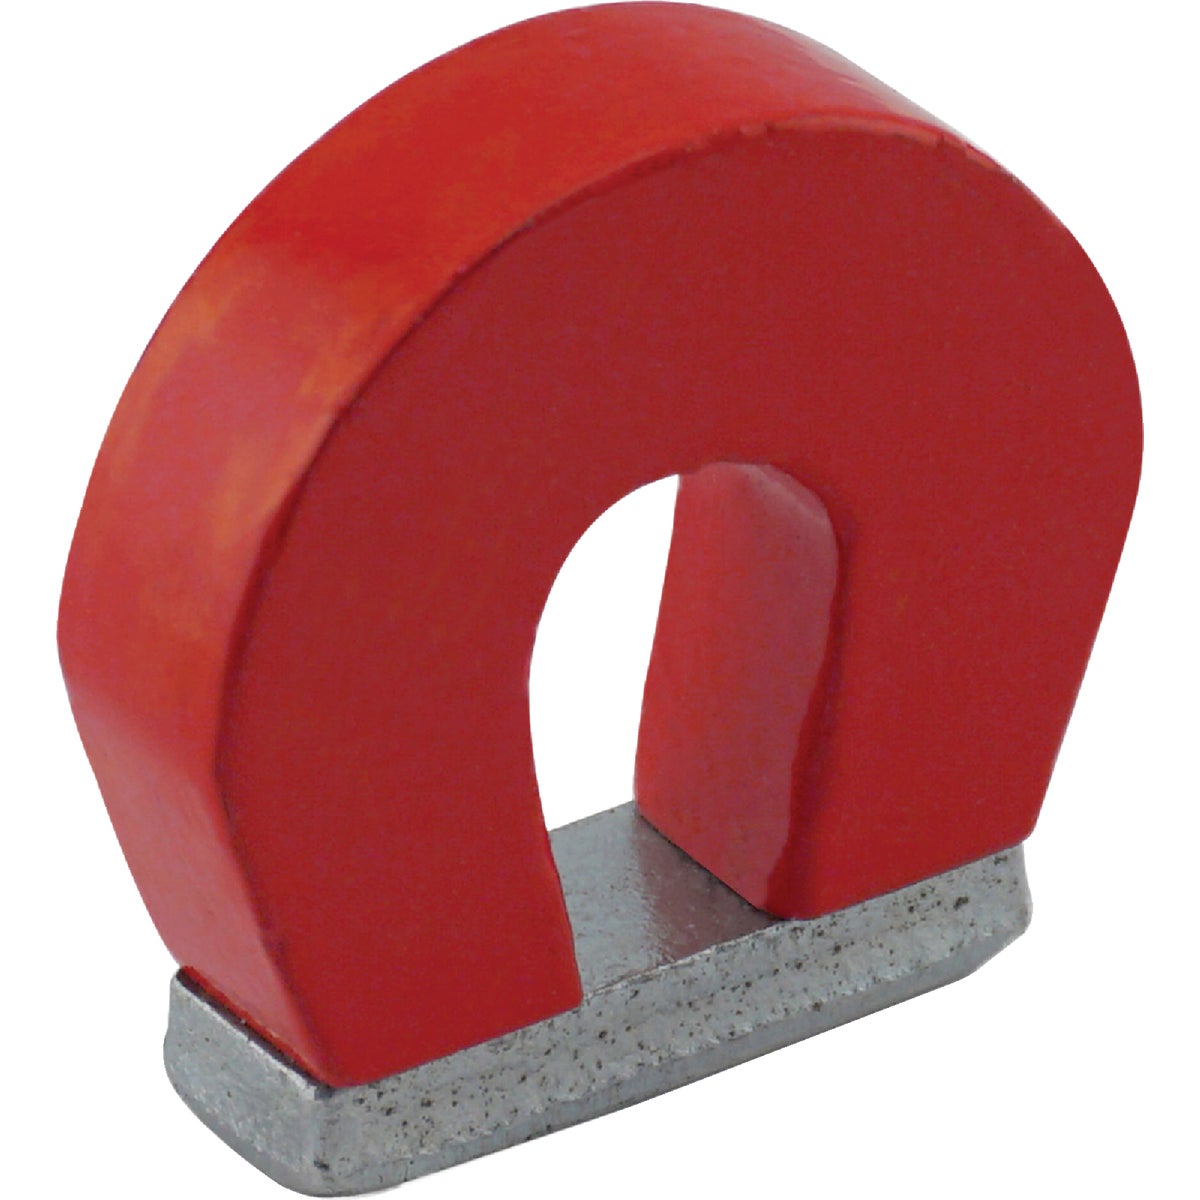 Item 331670, Horseshoe shaped magnet is ideal for picking up anything metal relating to 